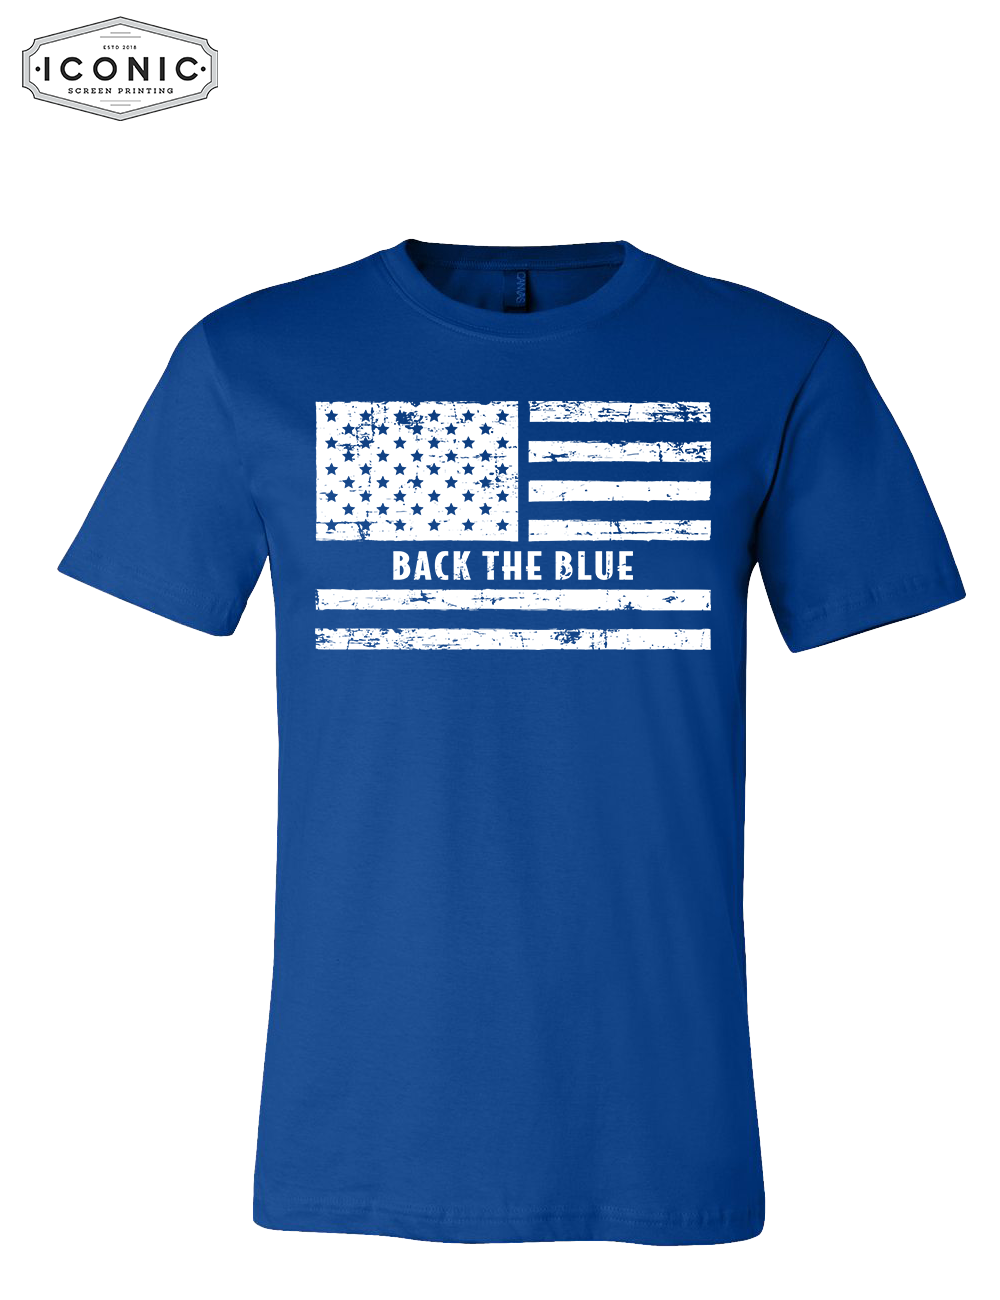 US Flag Back The Blue - Unisex Jersey Tee